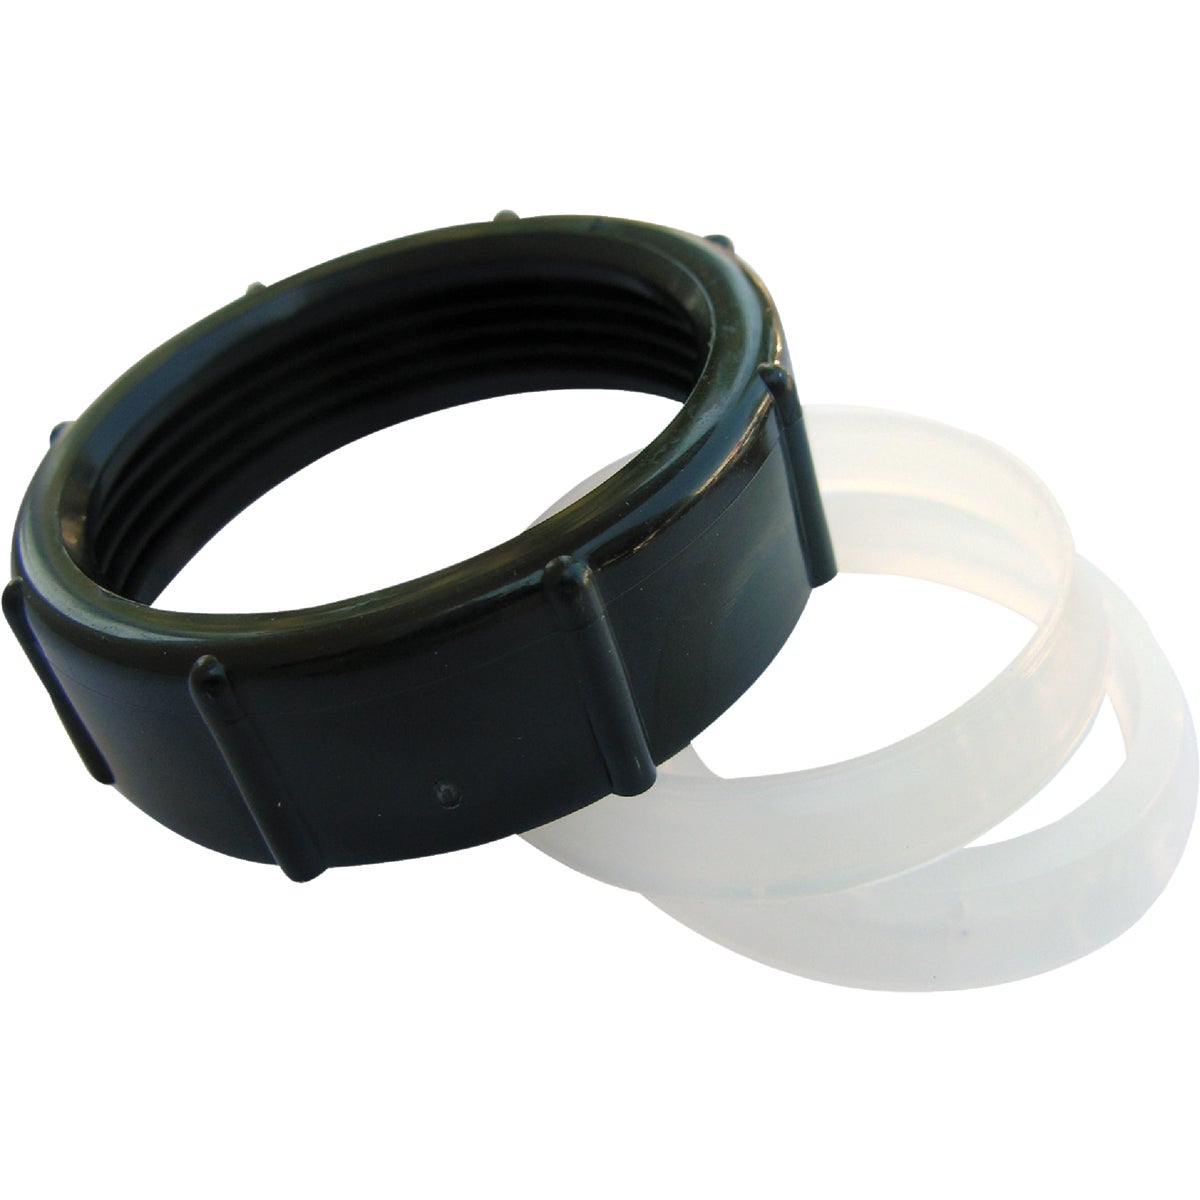 Lasco 1-1/2 In. x 1-1/4 In. Black Plastic Slip Joint Nut and Washer